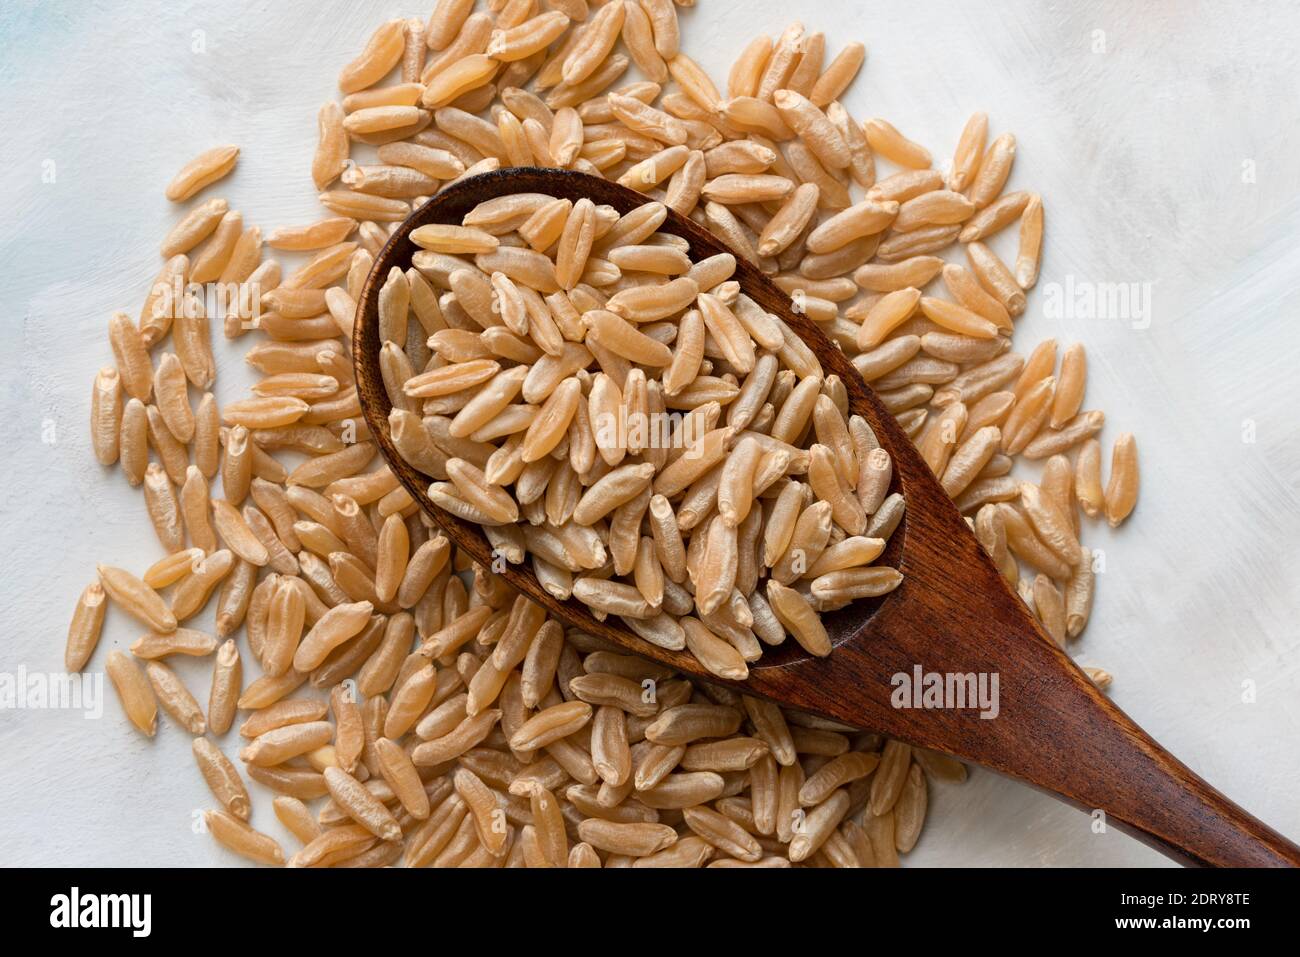 Ancient Kamut Grain on a Wood Spoon Stock Photo